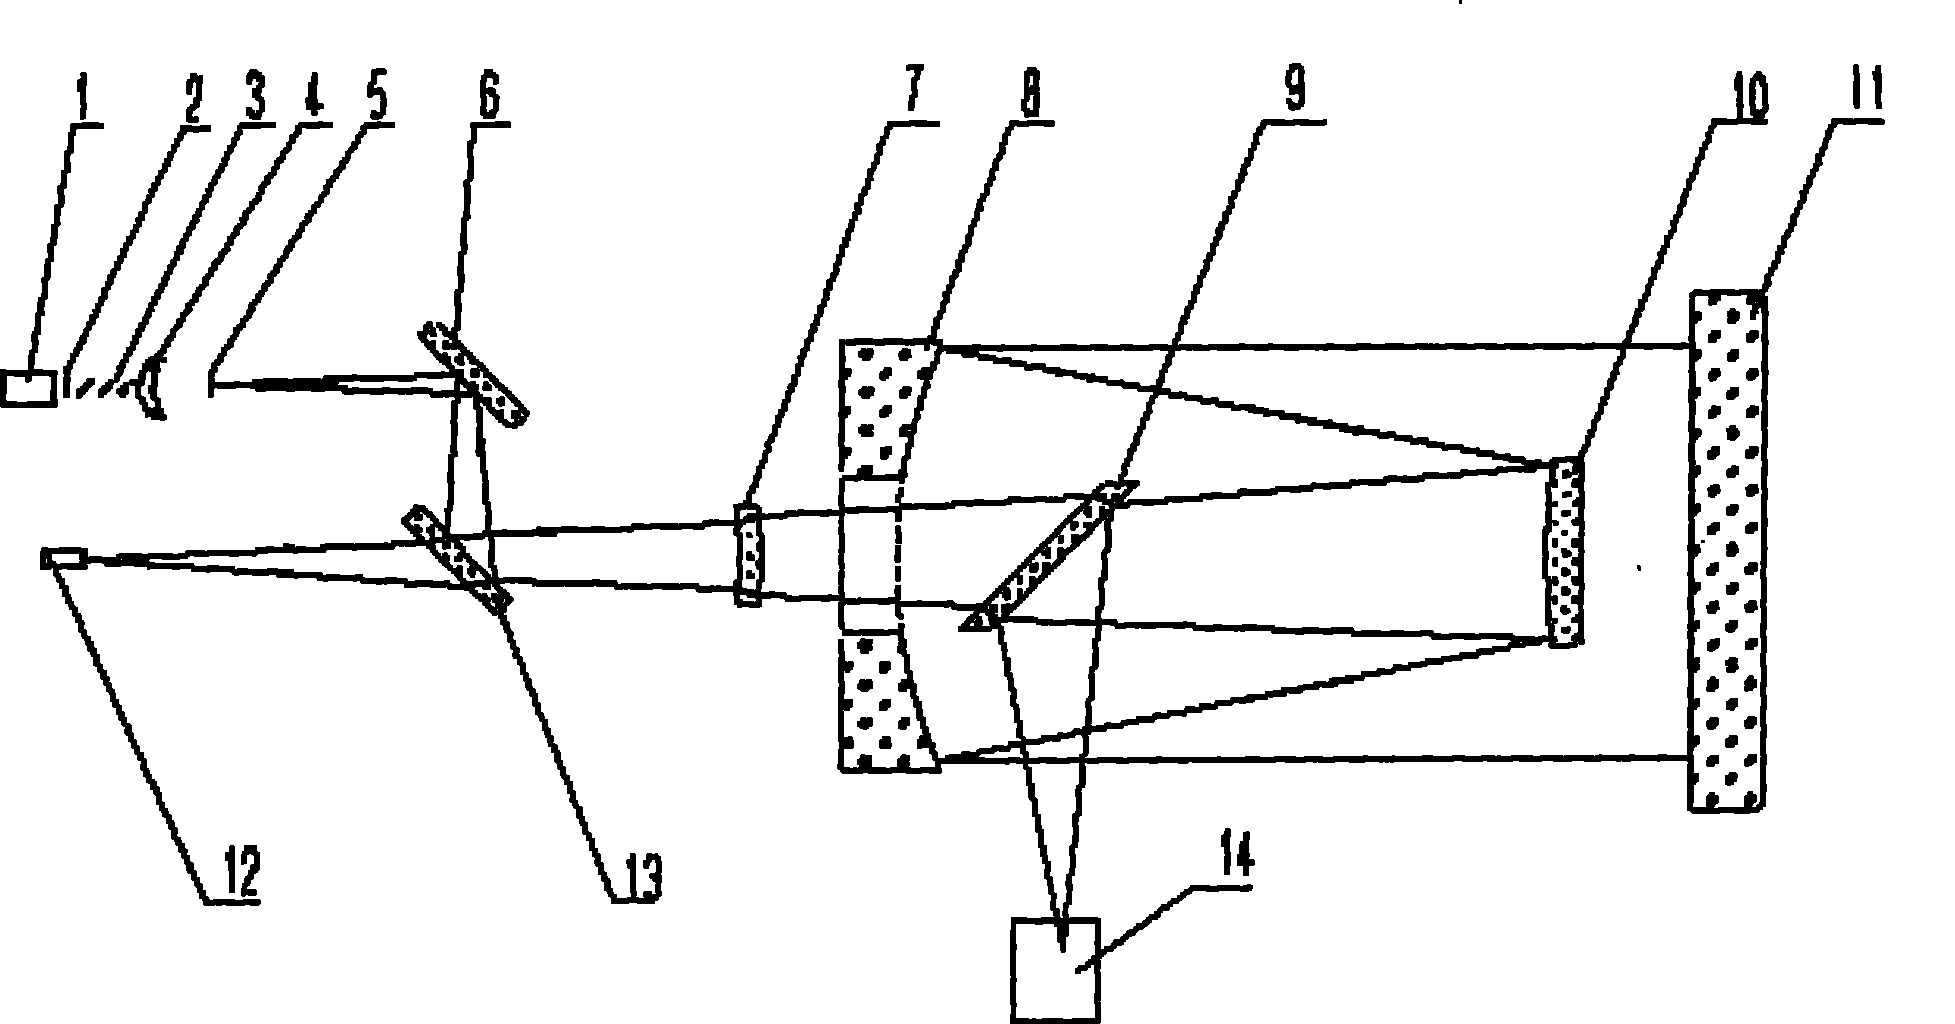 Surveymeter for parallelism of optical axis of visible light and infrared light wave